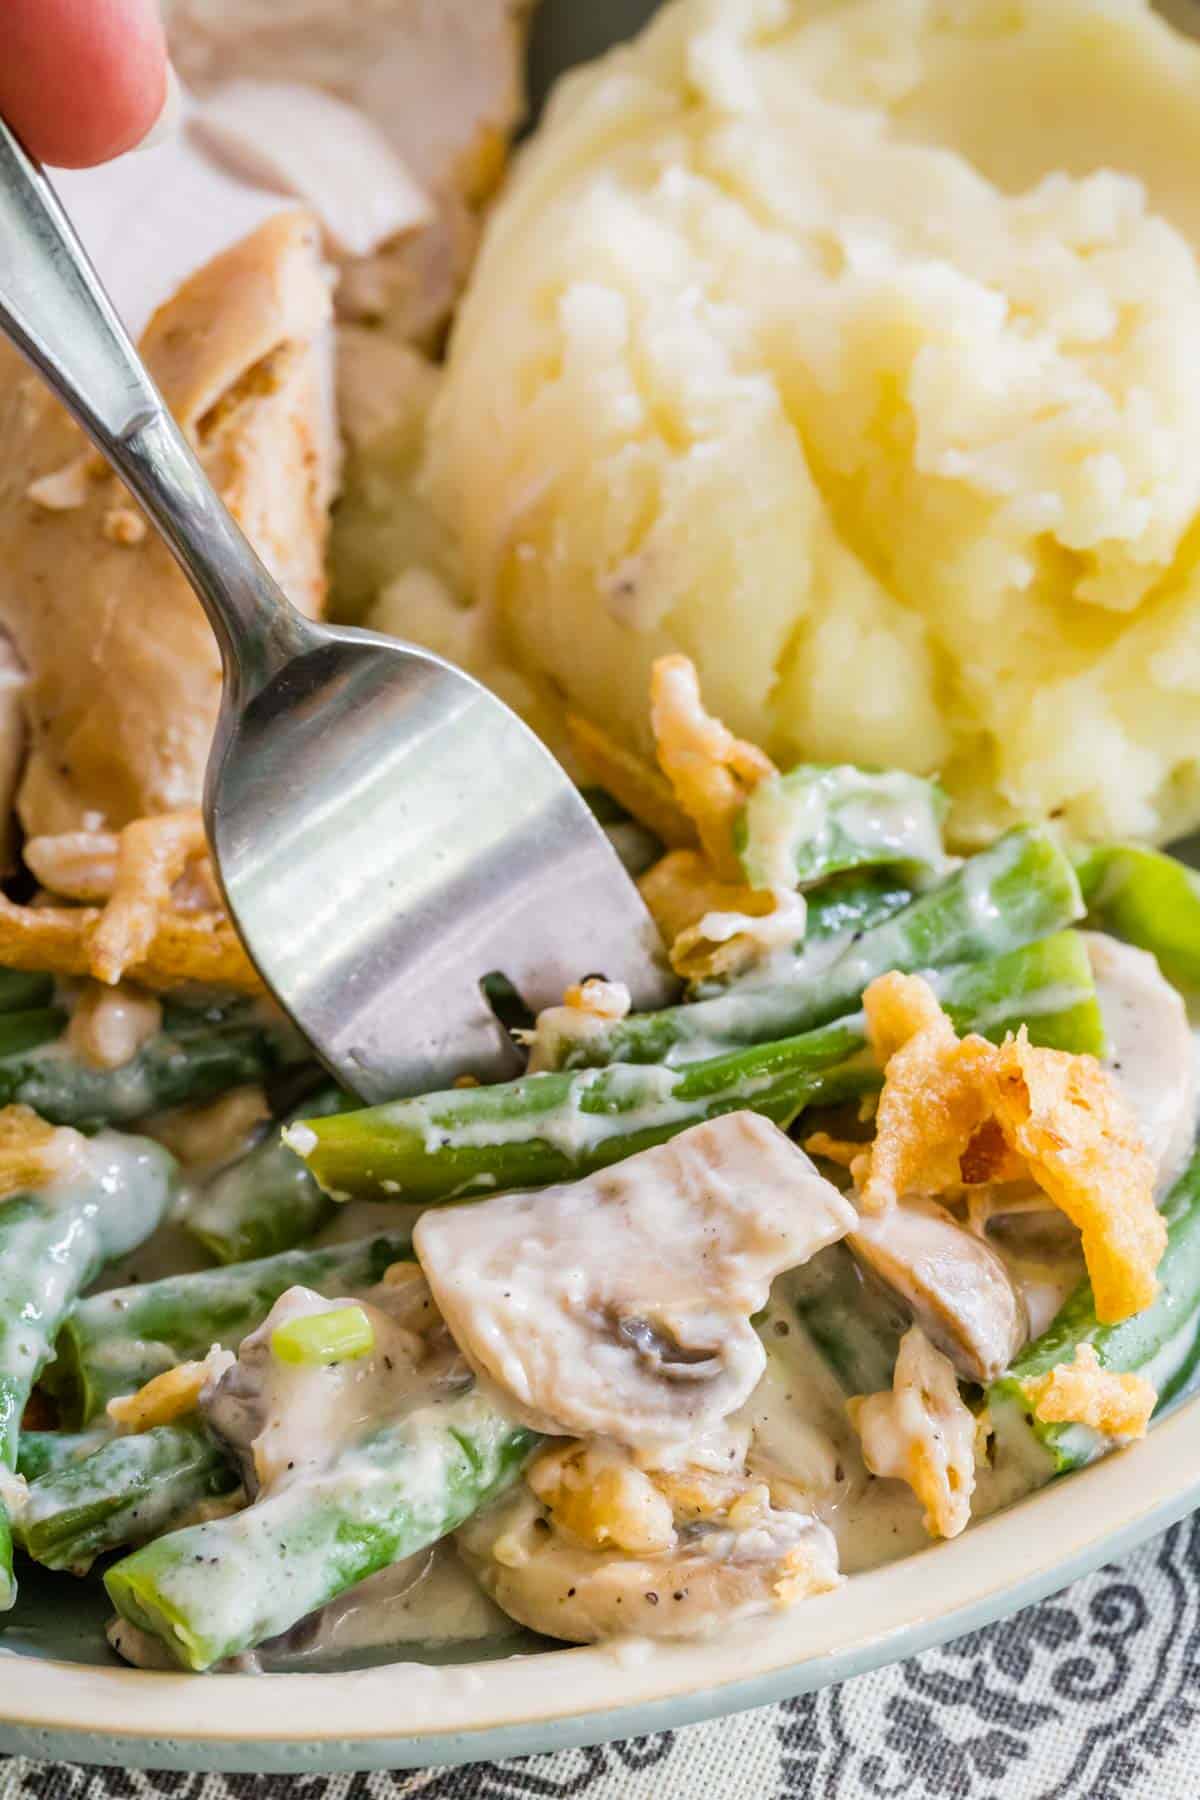 A fork stuck into a serving of gluten-free green bean casserole on a plate next to mashed potatoes and slices of turkey.